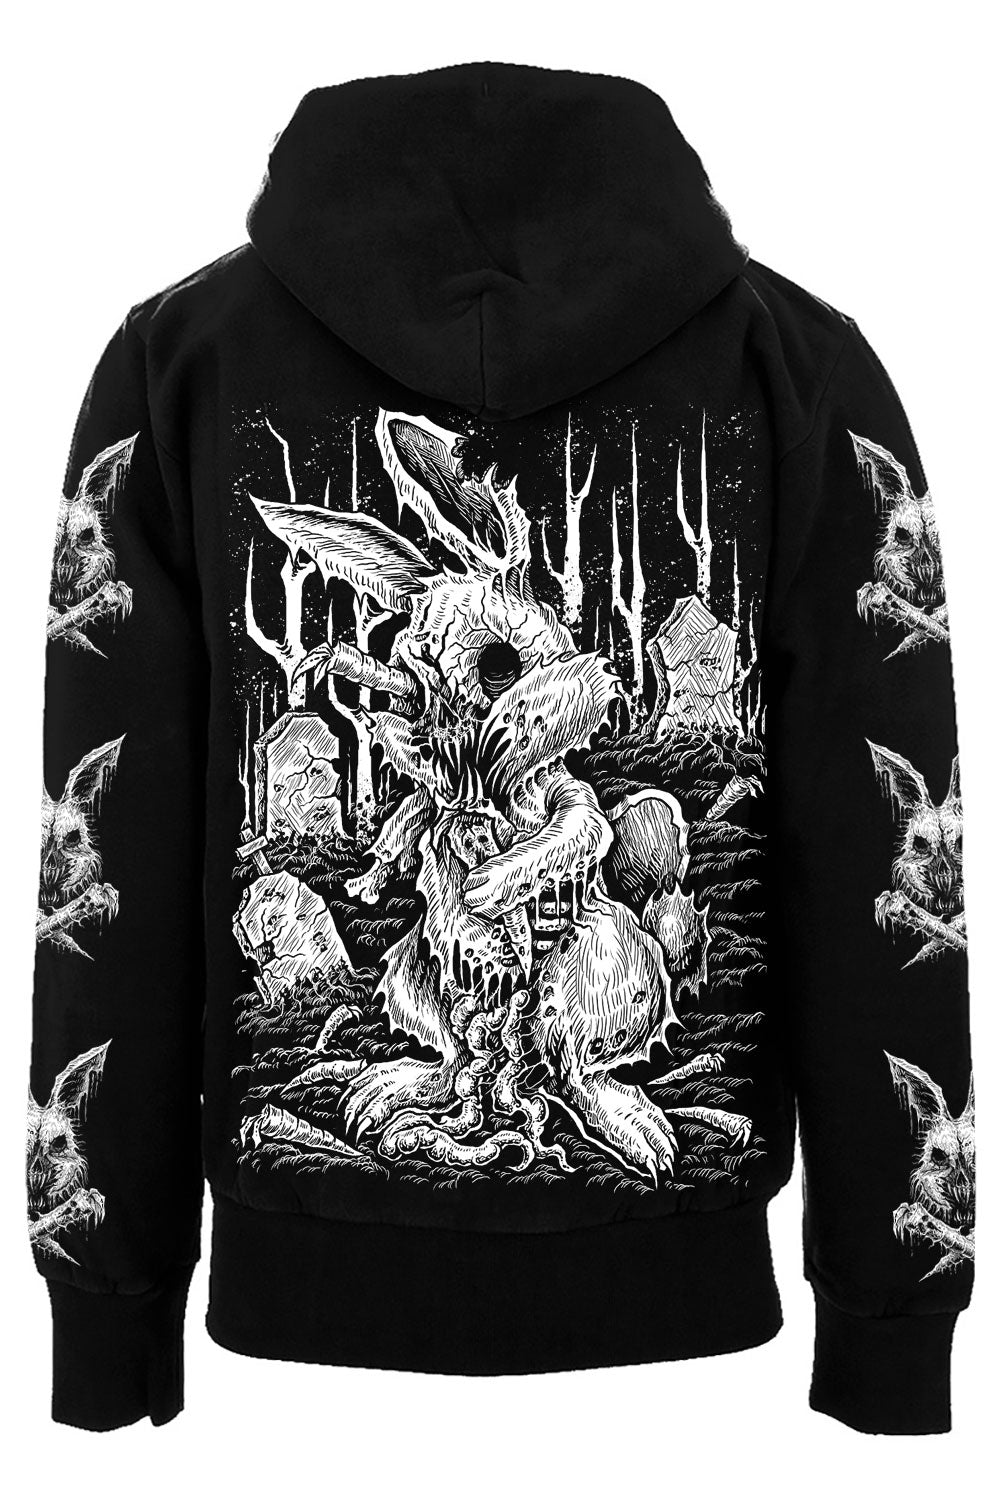 Zombunny Hoodie [Zipper or Pullover]